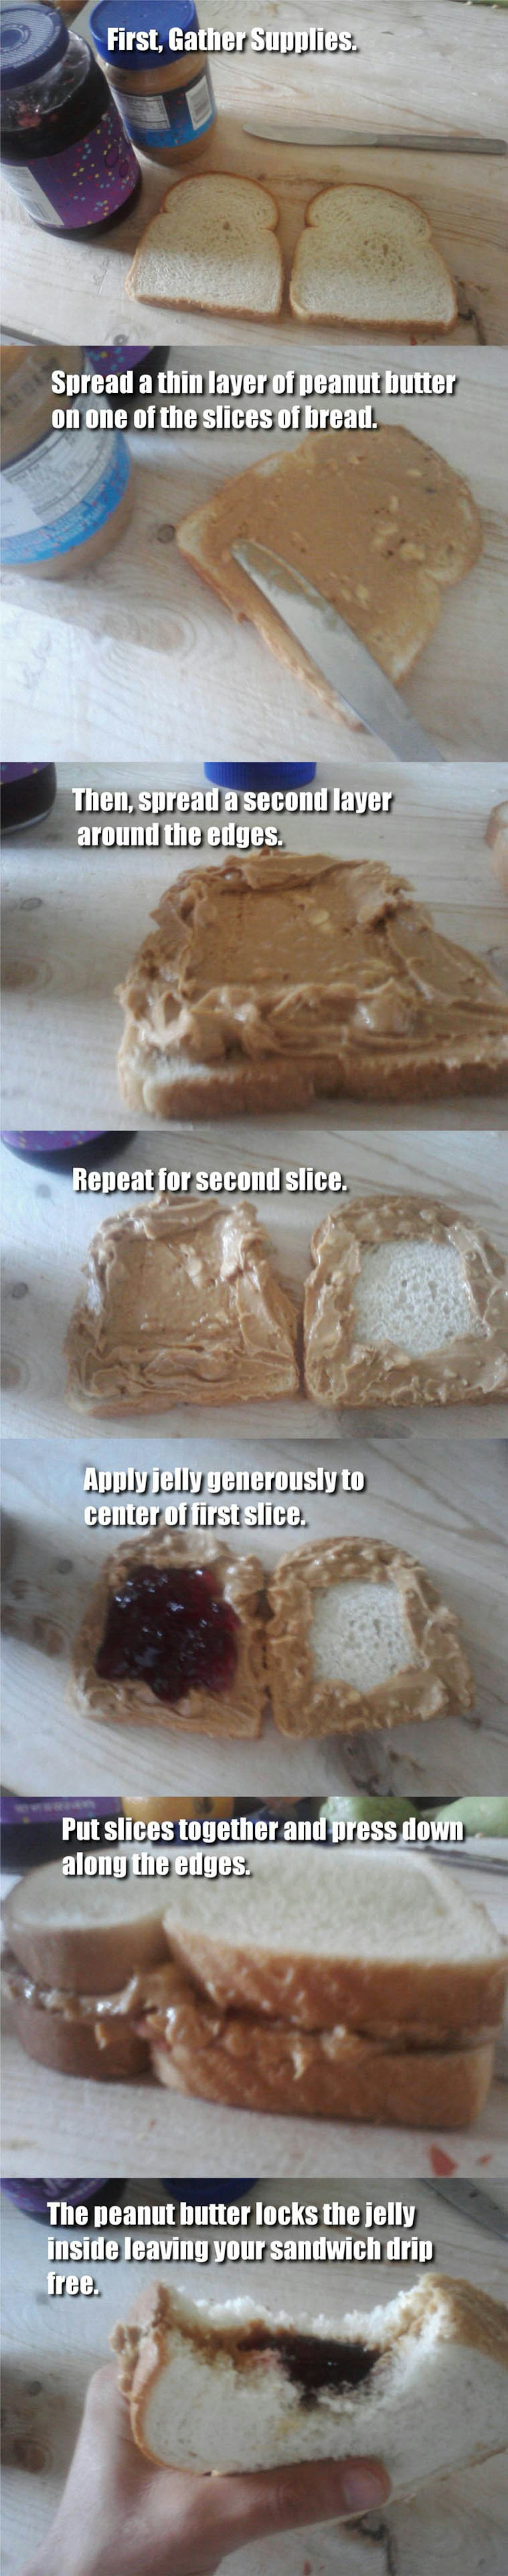 11 Important Hacks Every Peanut Butter Lover Needs To Know 1573